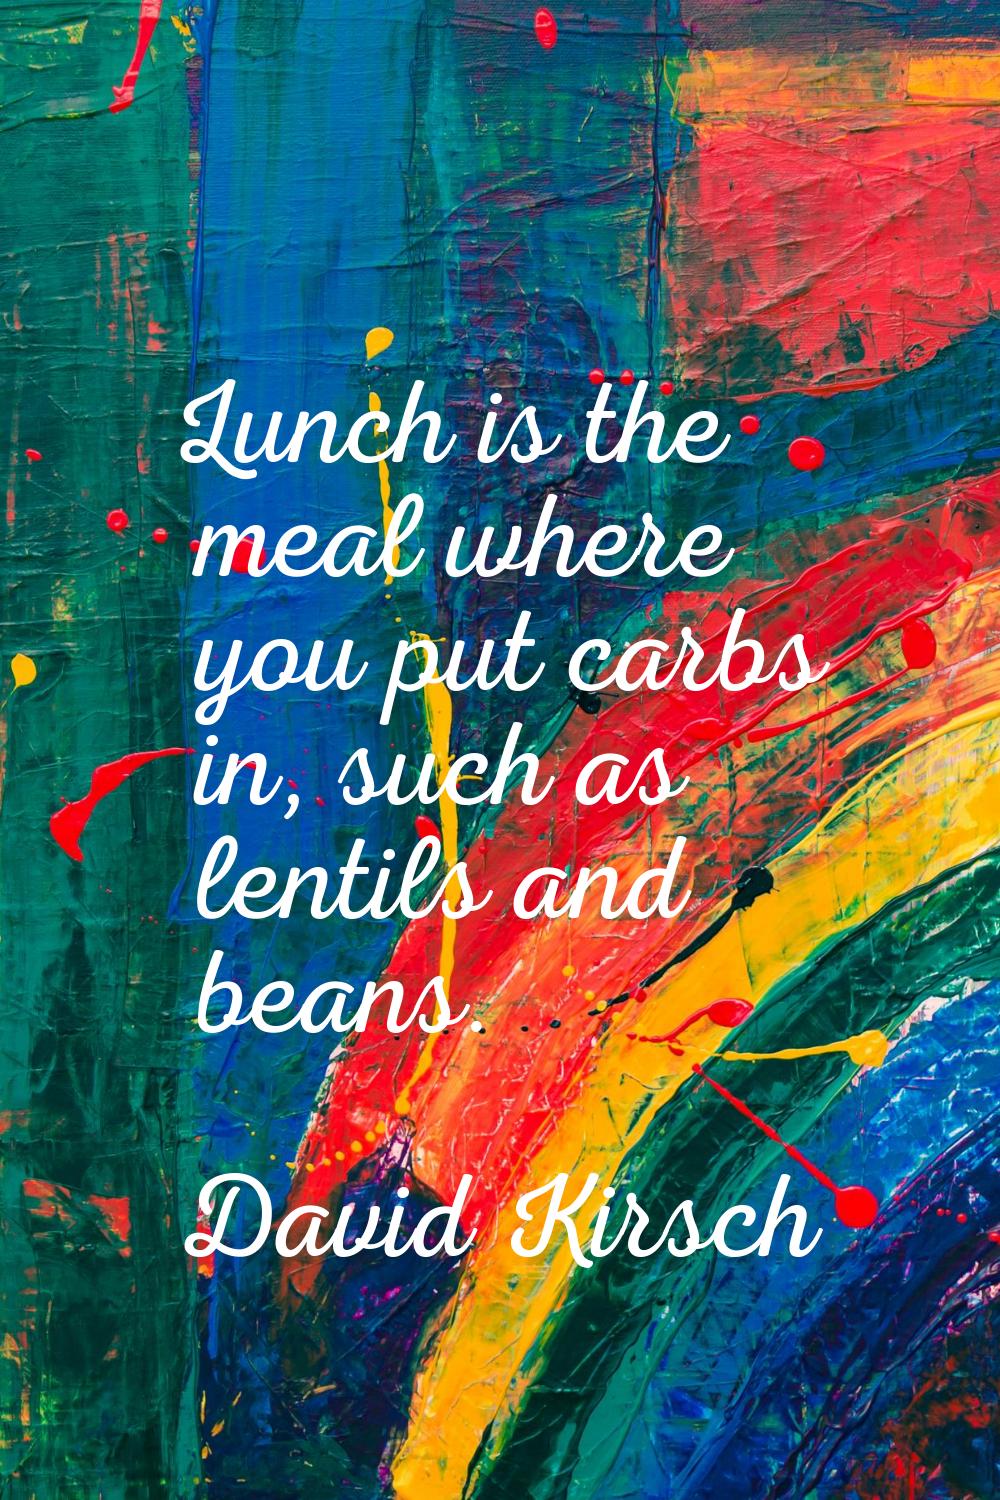 Lunch is the meal where you put carbs in, such as lentils and beans.